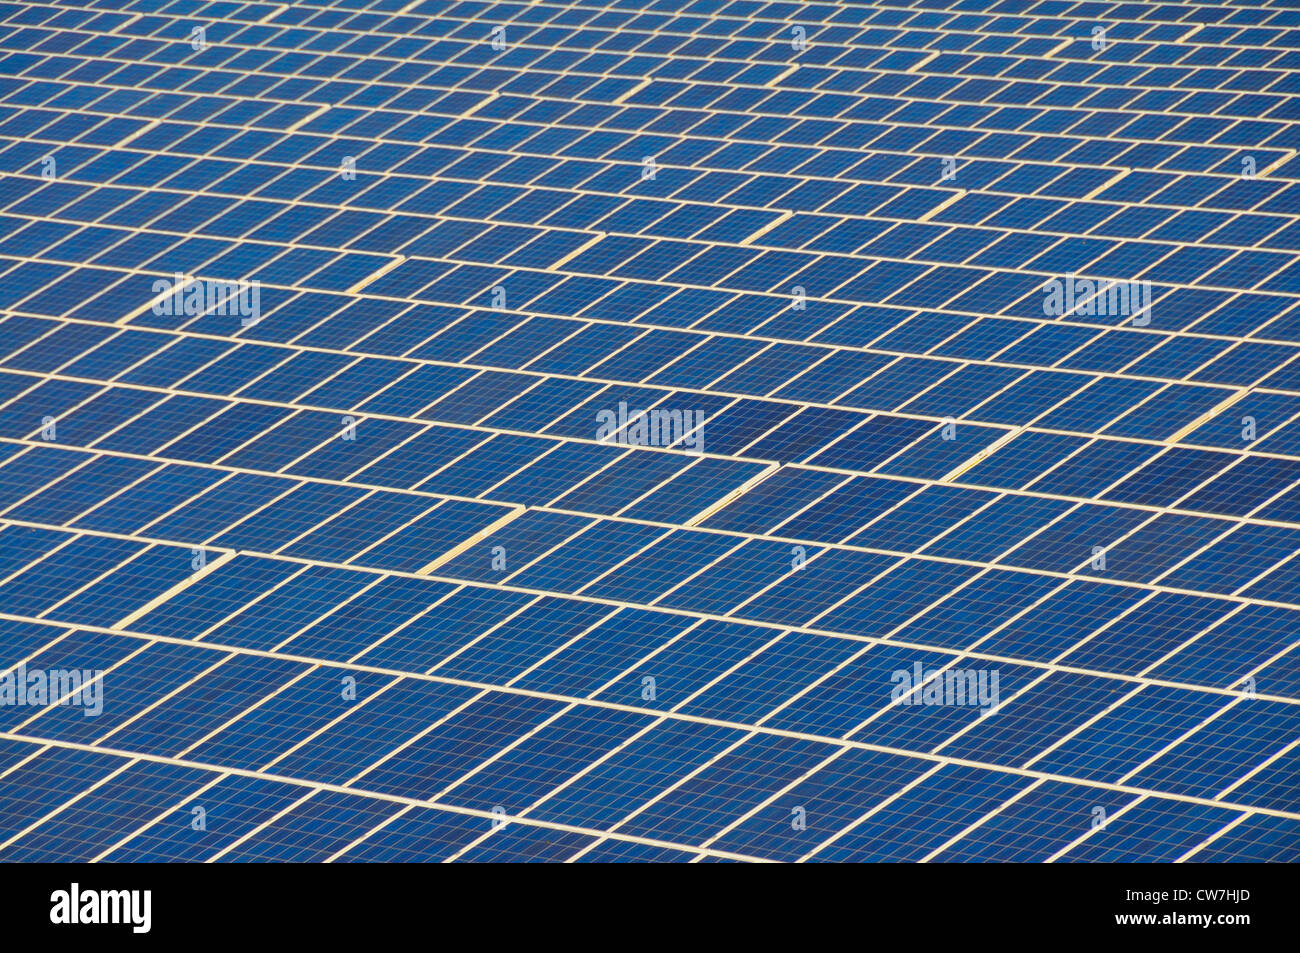 solar panels of the largest open space photovoltaic power plant in NRW to this day in Troisdorf-Oberlar, Germany, North Rhine-Westphalia, Troisdorf Stock Photo